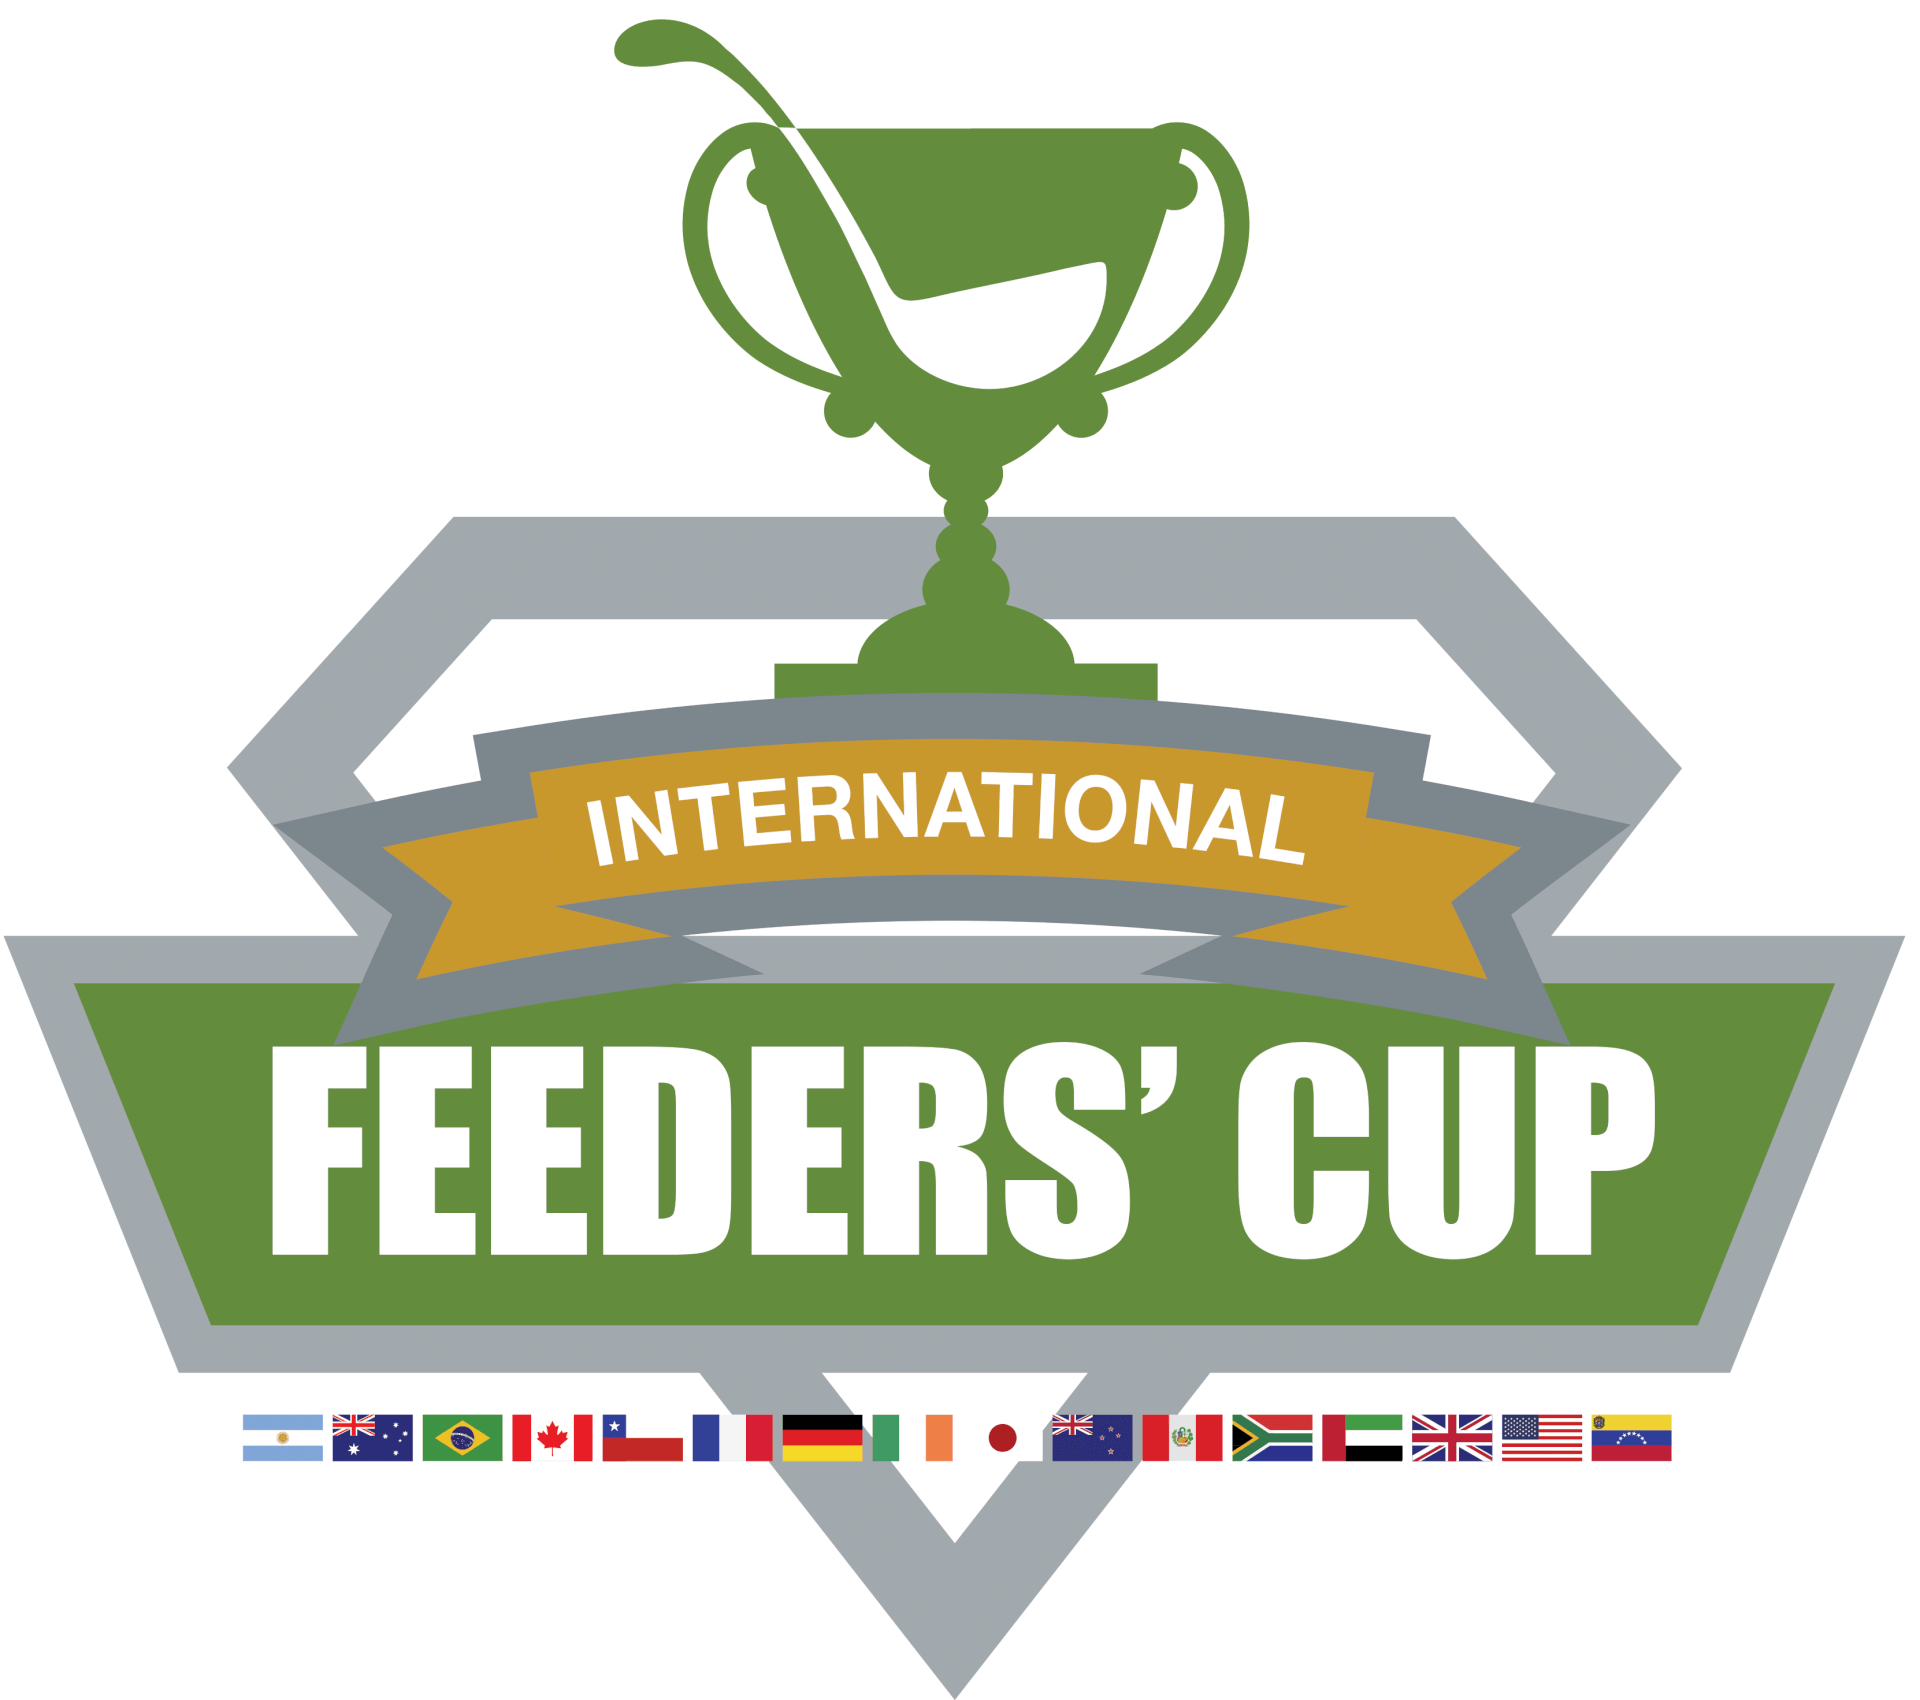 Feeders' Cup